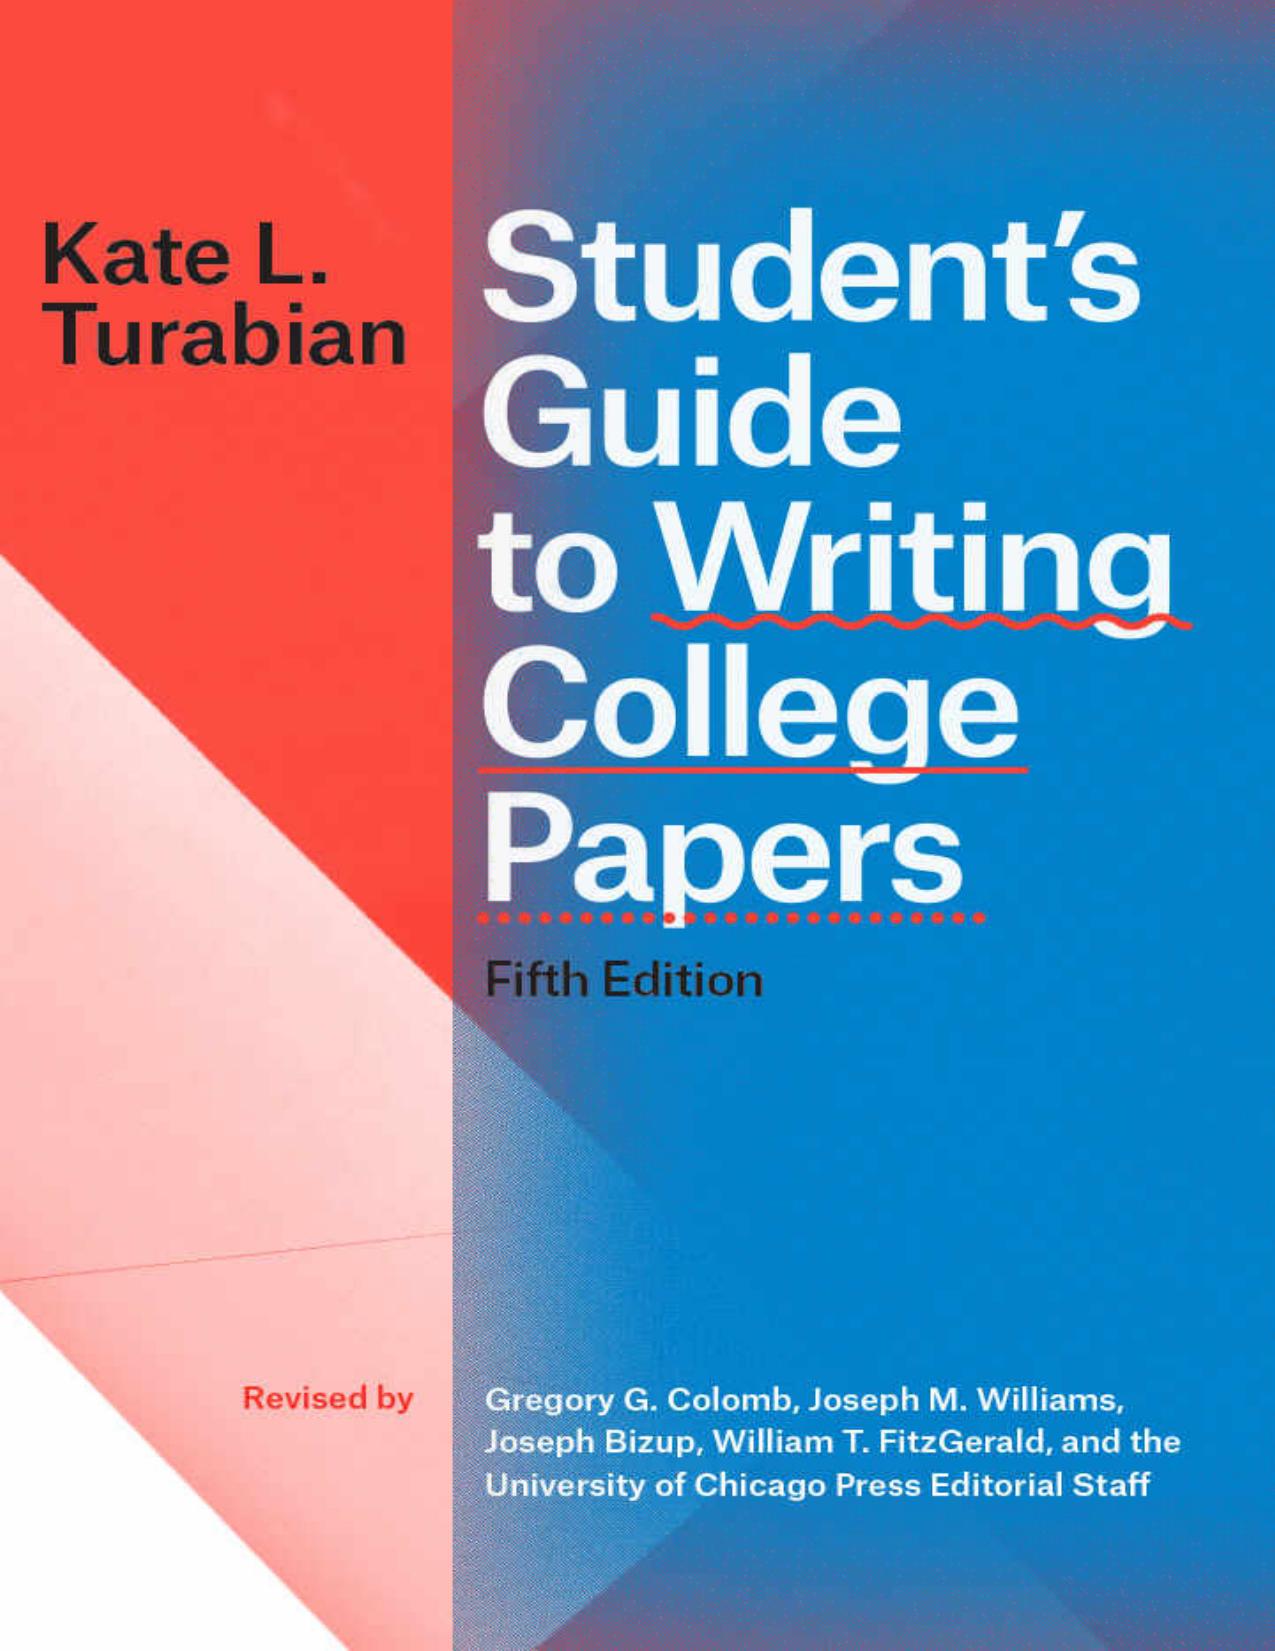 Student's Guide to Writing College Papers 5th Edition by Kate L. Turabian.jpg